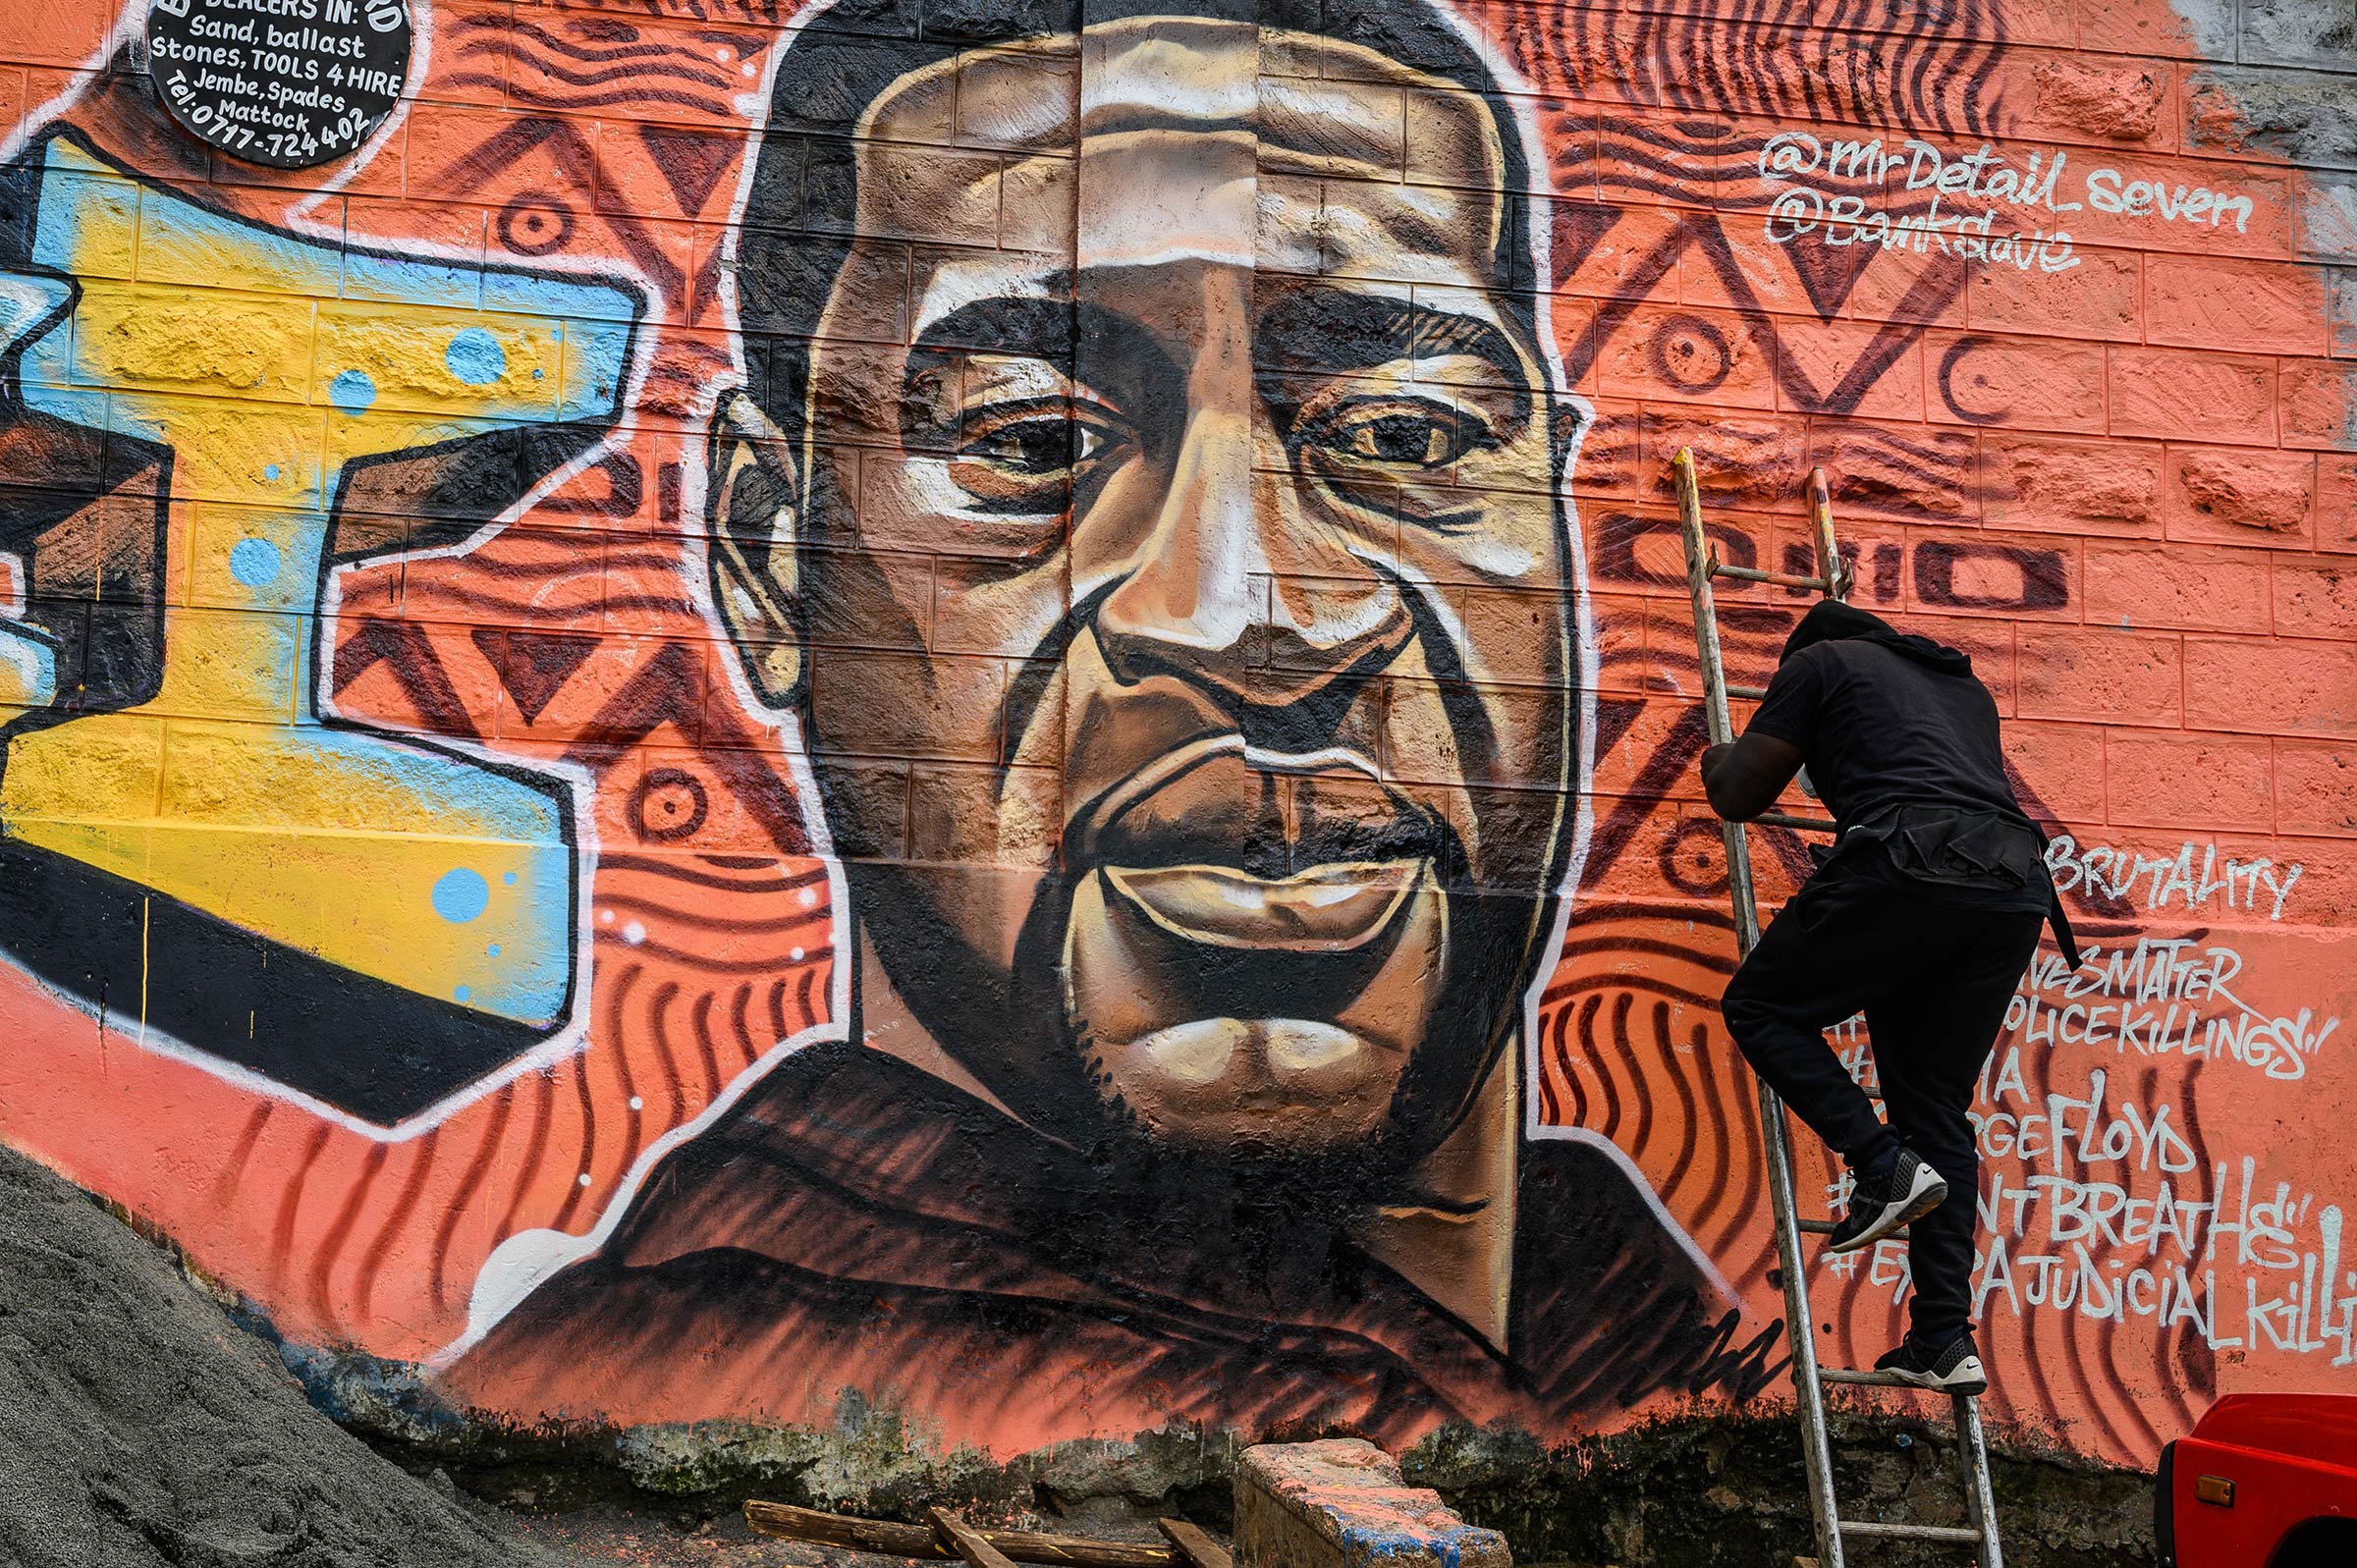 Kenyan mural artist Allan Mwangi, also known as Mr.detail.seven, paints a graffiti mural in the Kibera slum in Nairobi on June 3, 2020, depicting the American, George Floyd, who was killed by a police officer in Minneapolis, in the United States.